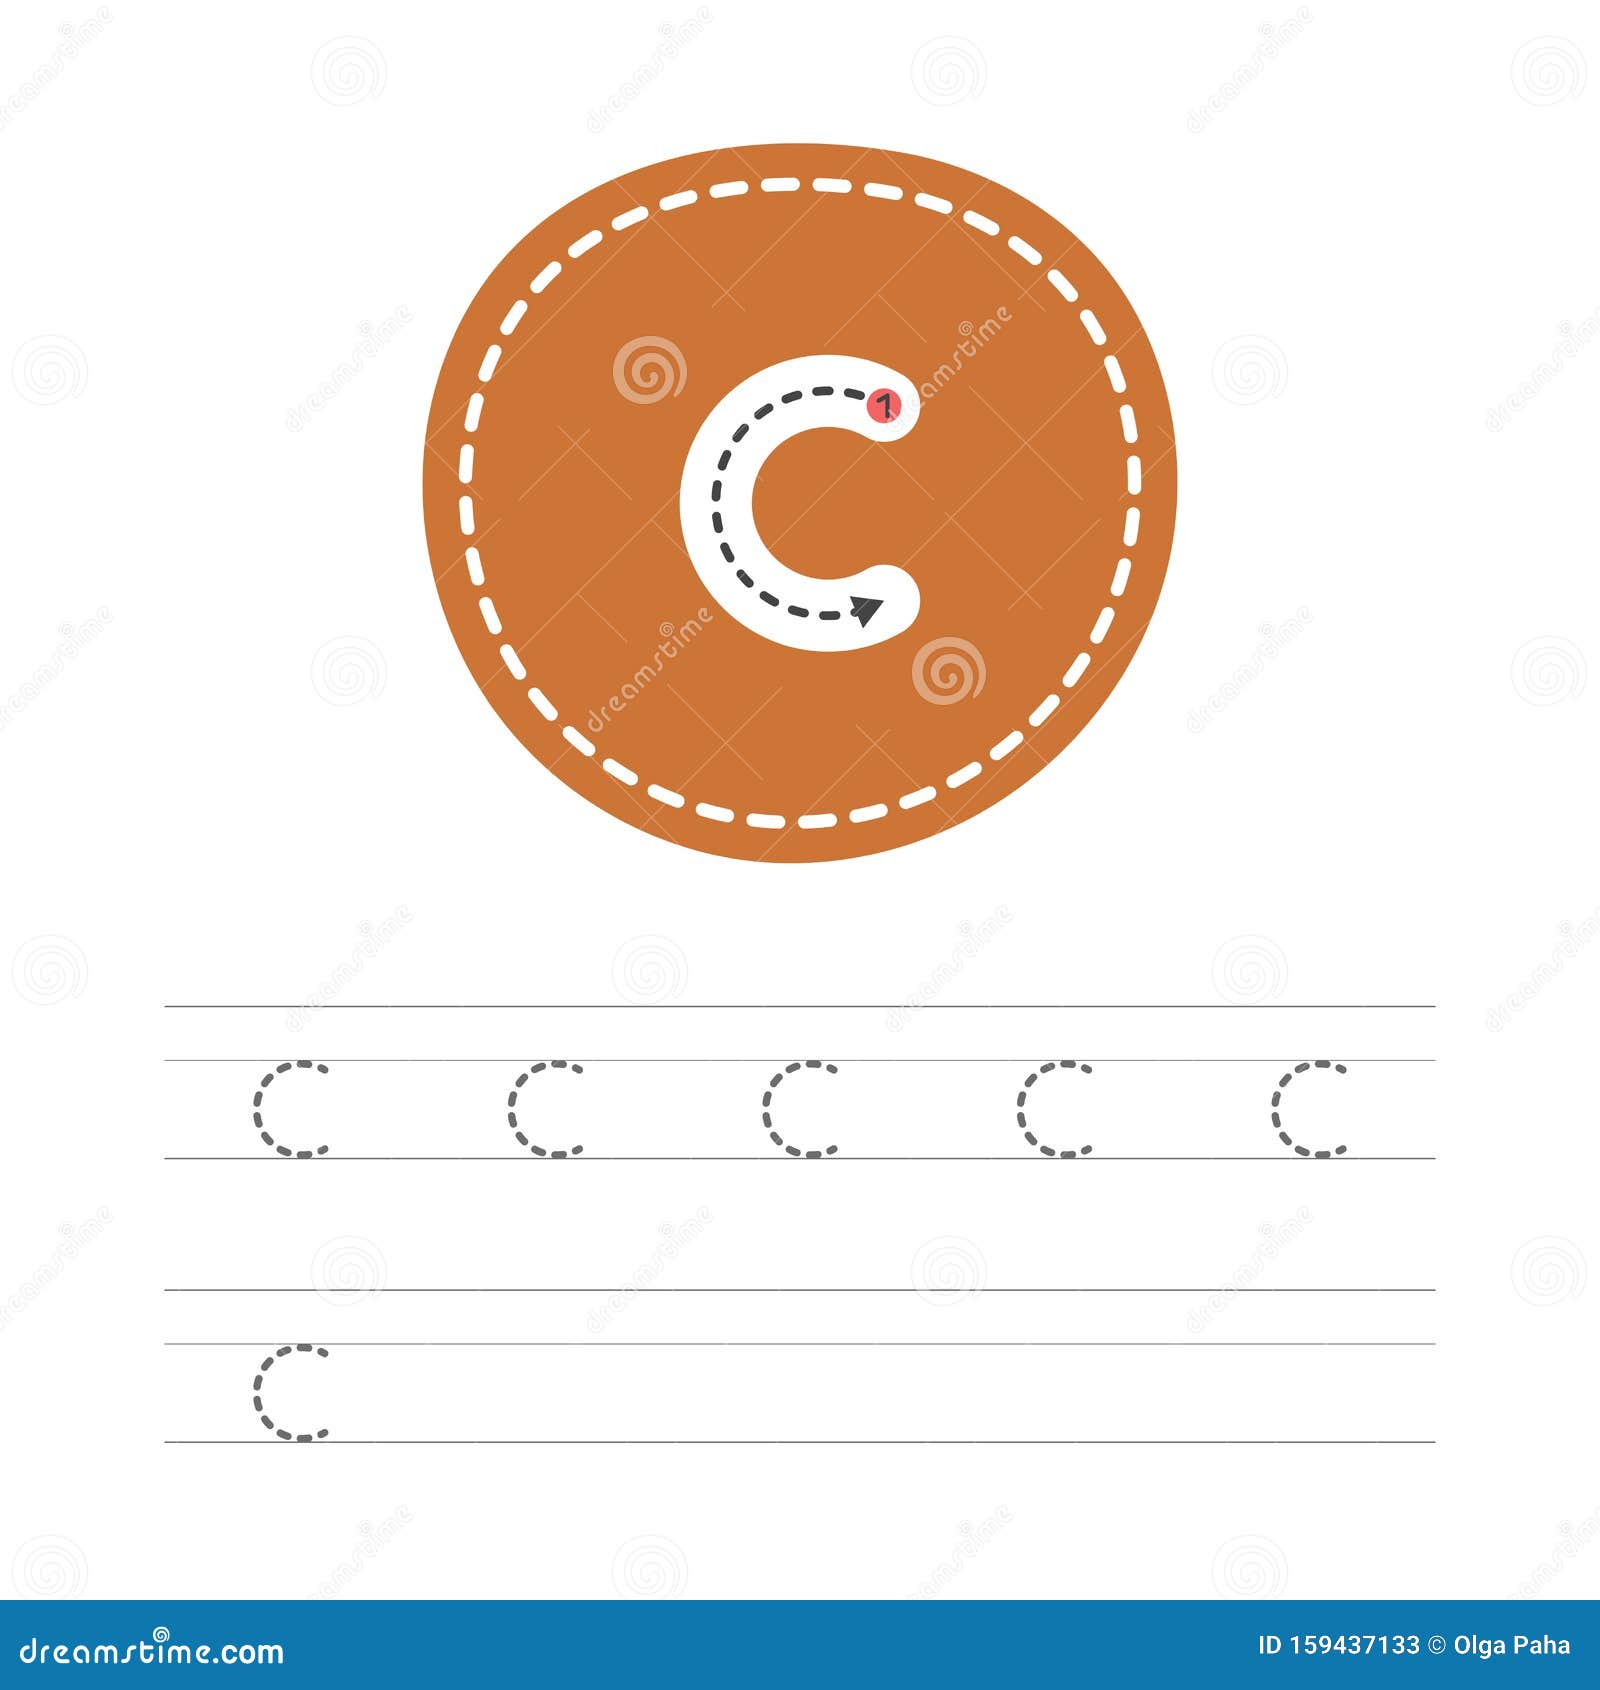 Write a letter C small stock vector. Illustration of grammar